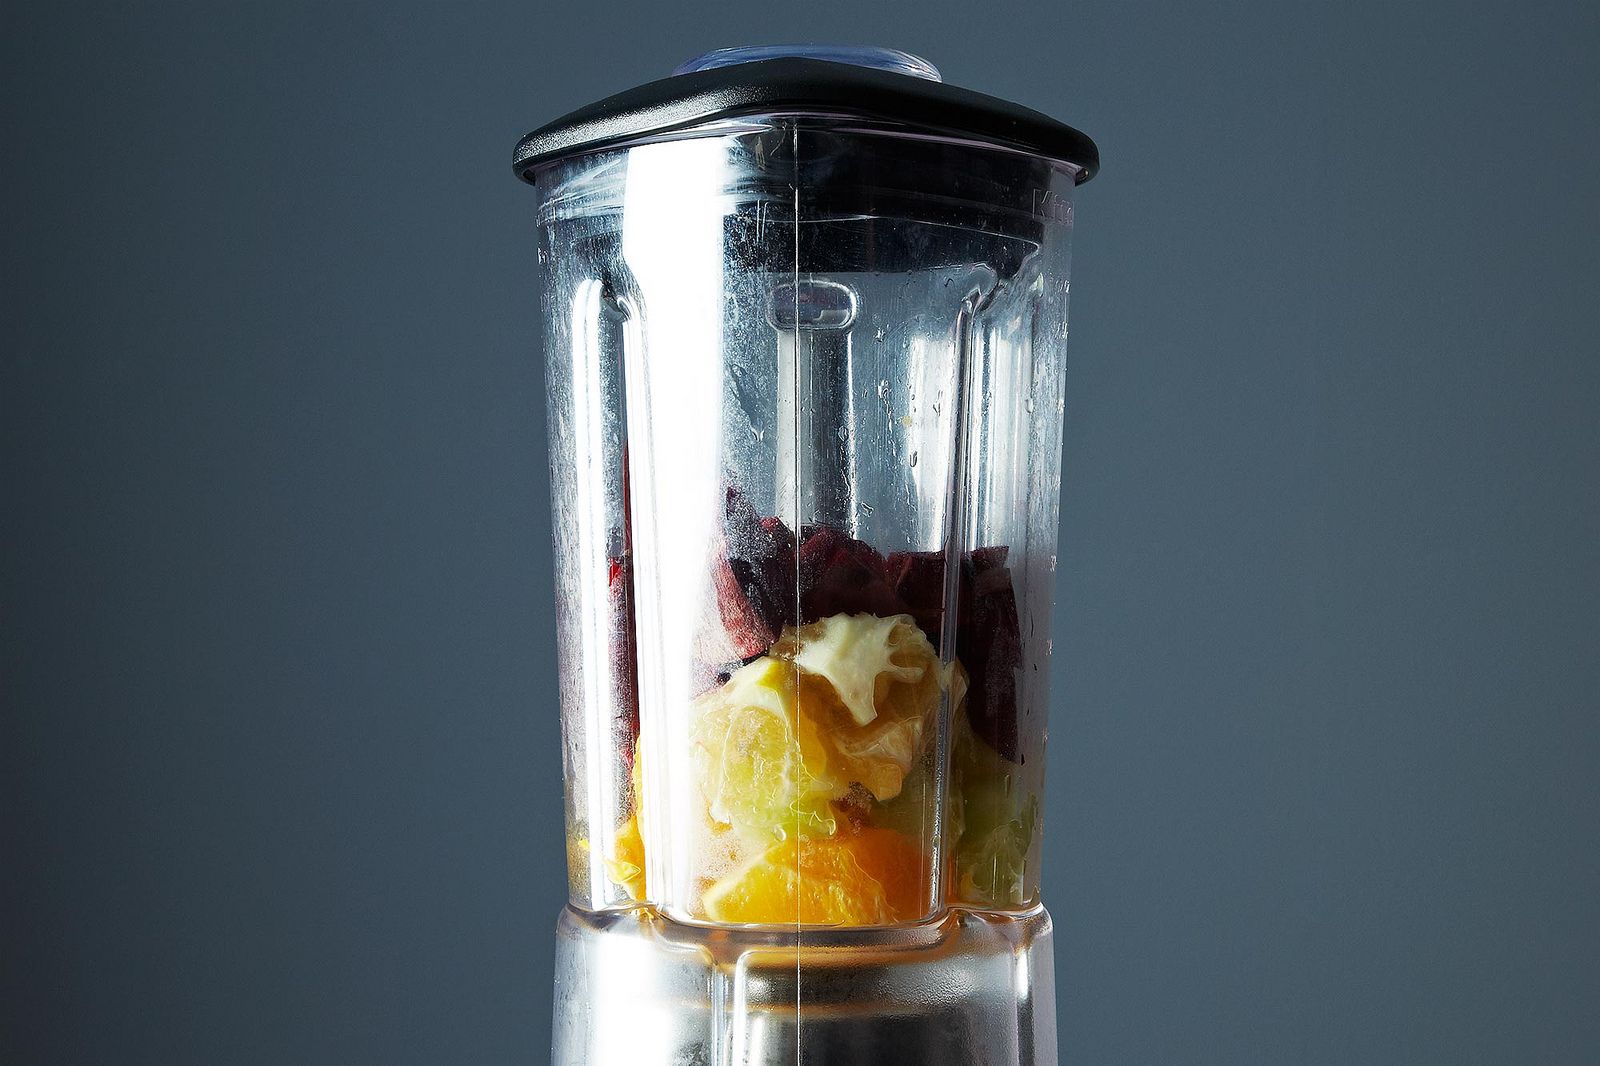 How to Make Juice Without a Juicer, from Food52